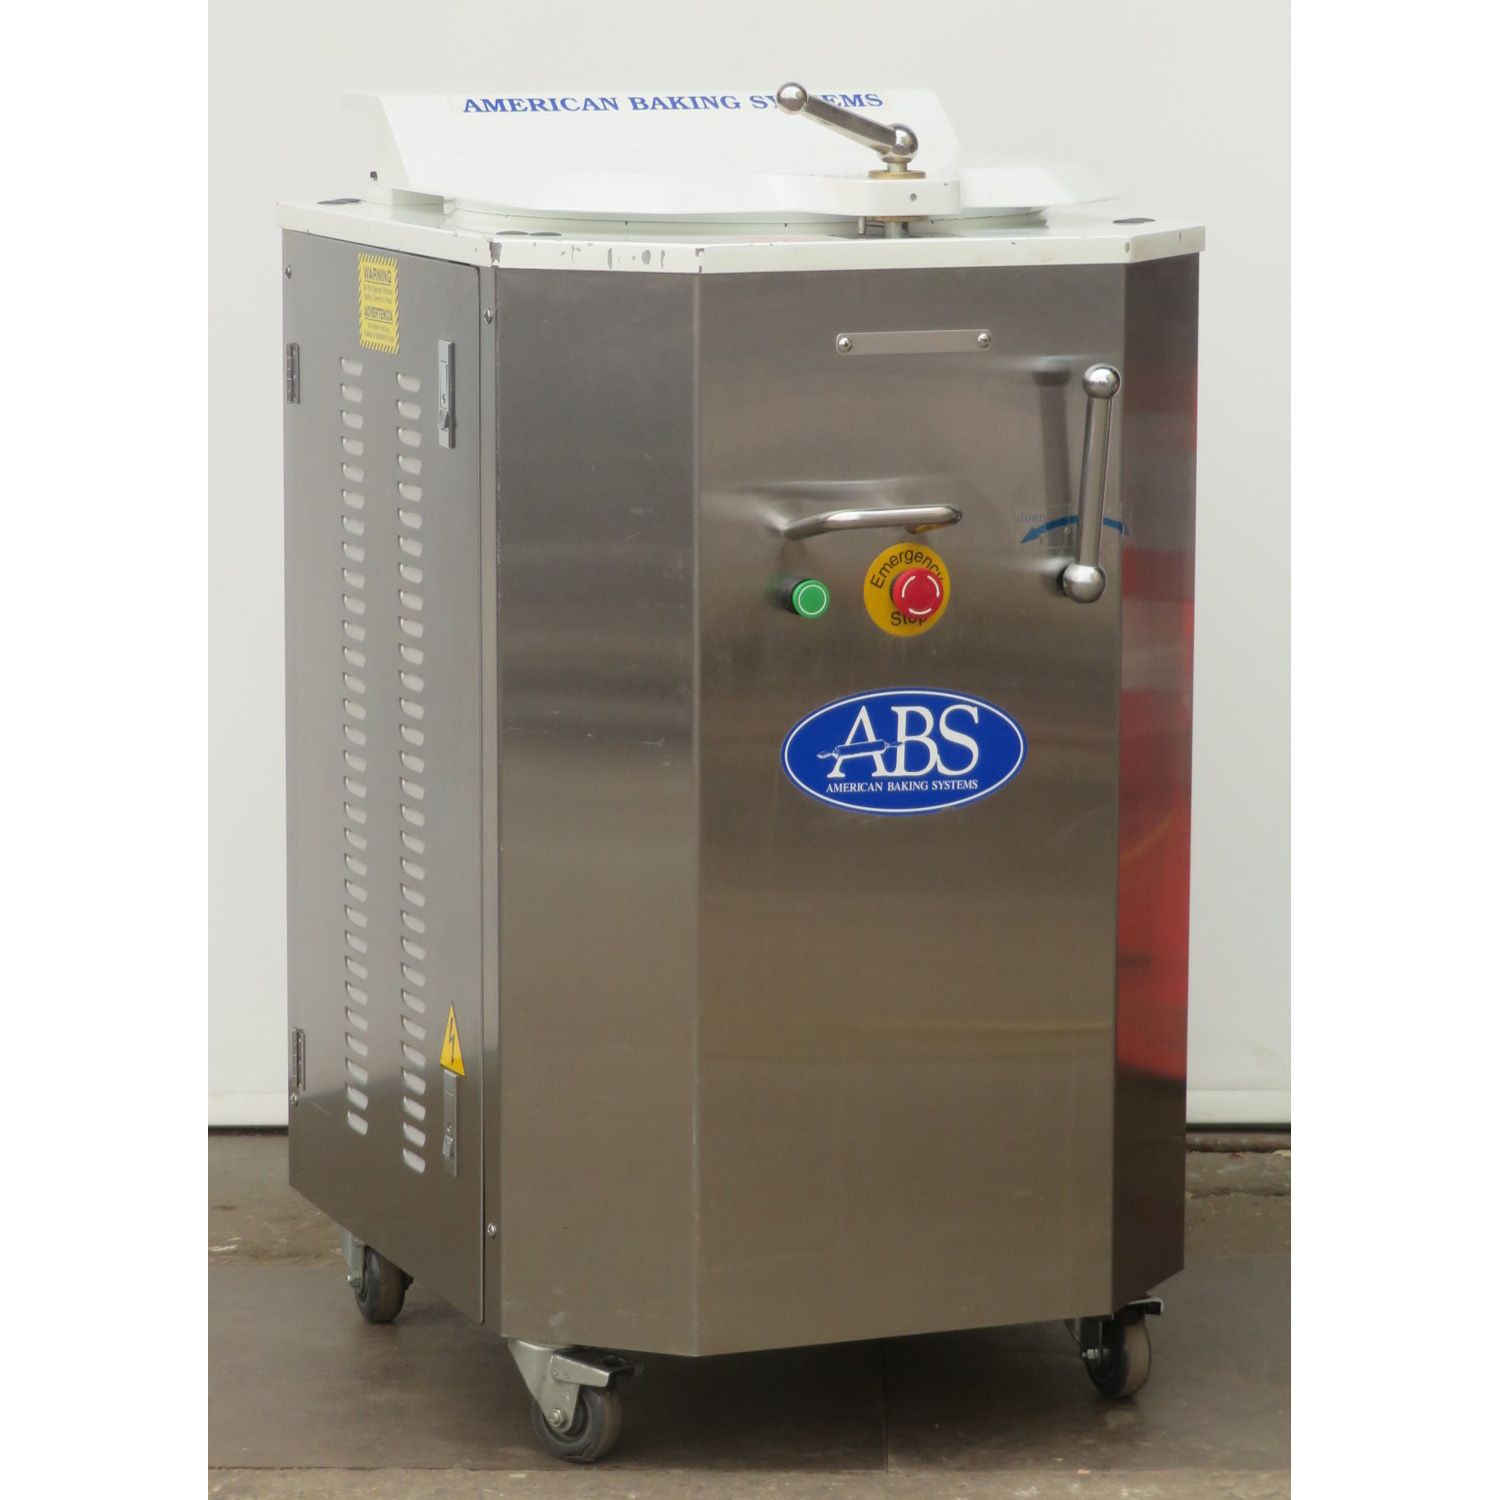 ABS ABSHDD20 Hydraulic 20 Portion Dough Divider, Used Excellent Condition